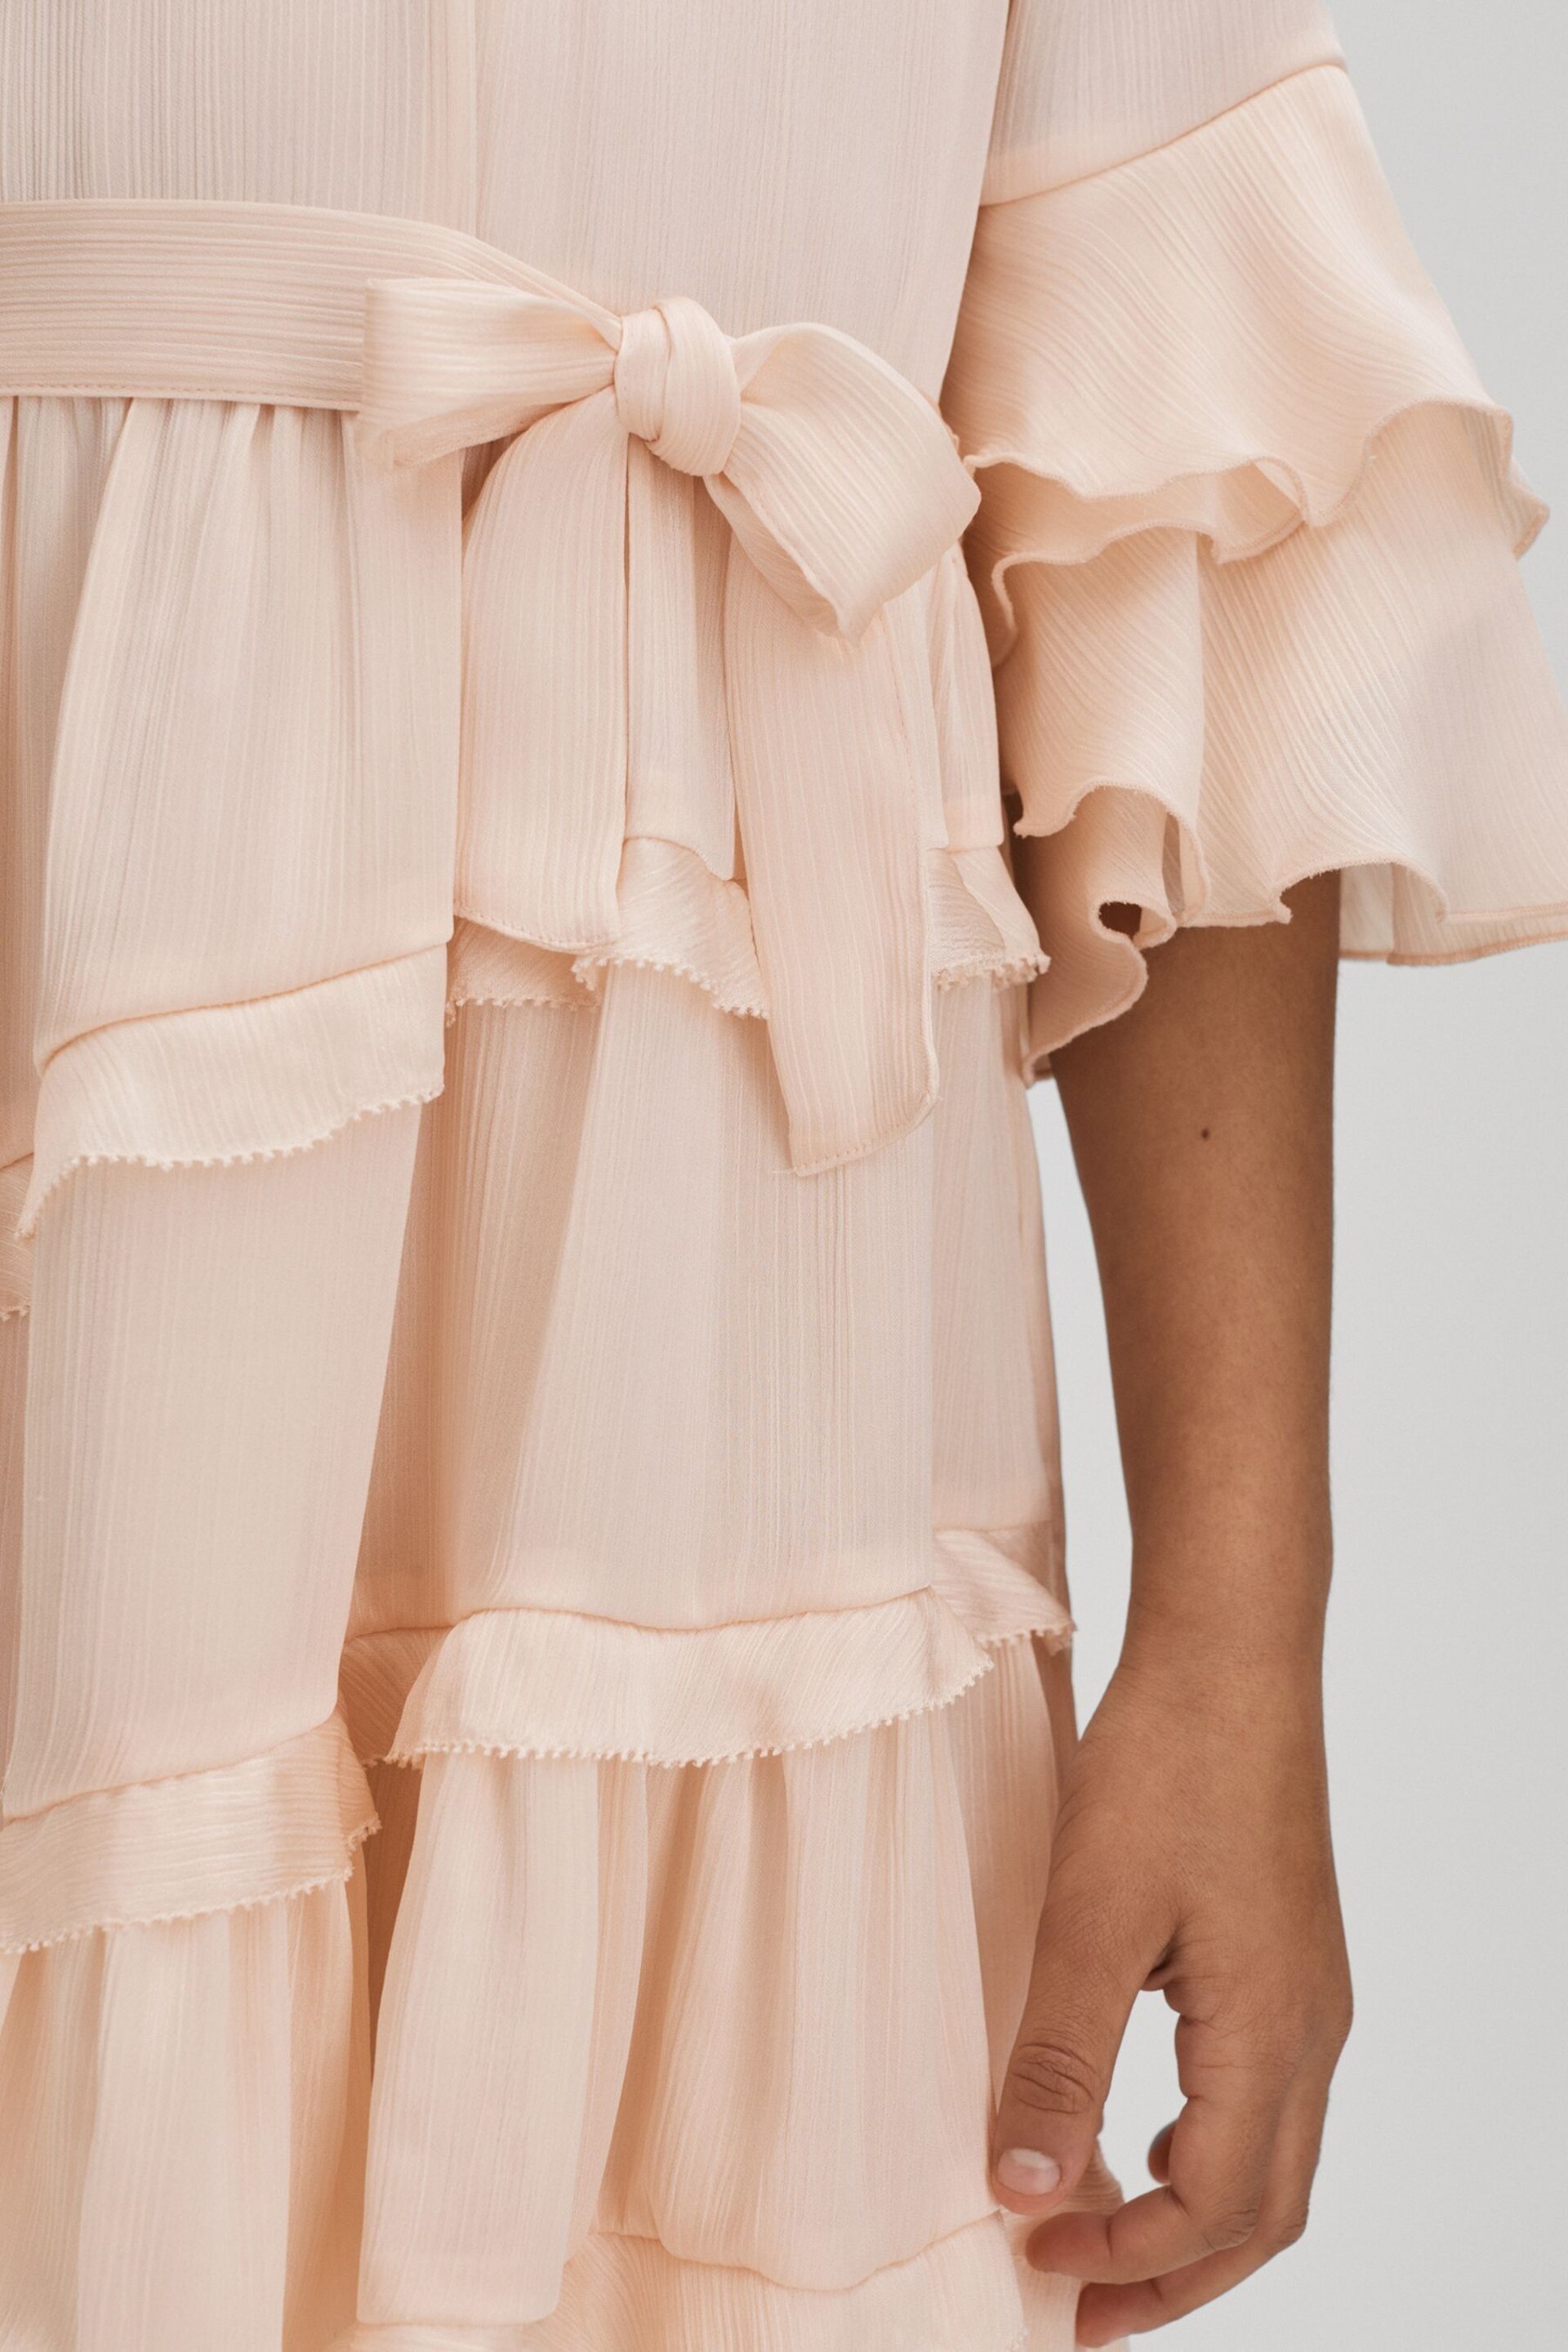 Reiss Pink Polly Senior Textured Satin Frilly Dress - Image 4 of 7